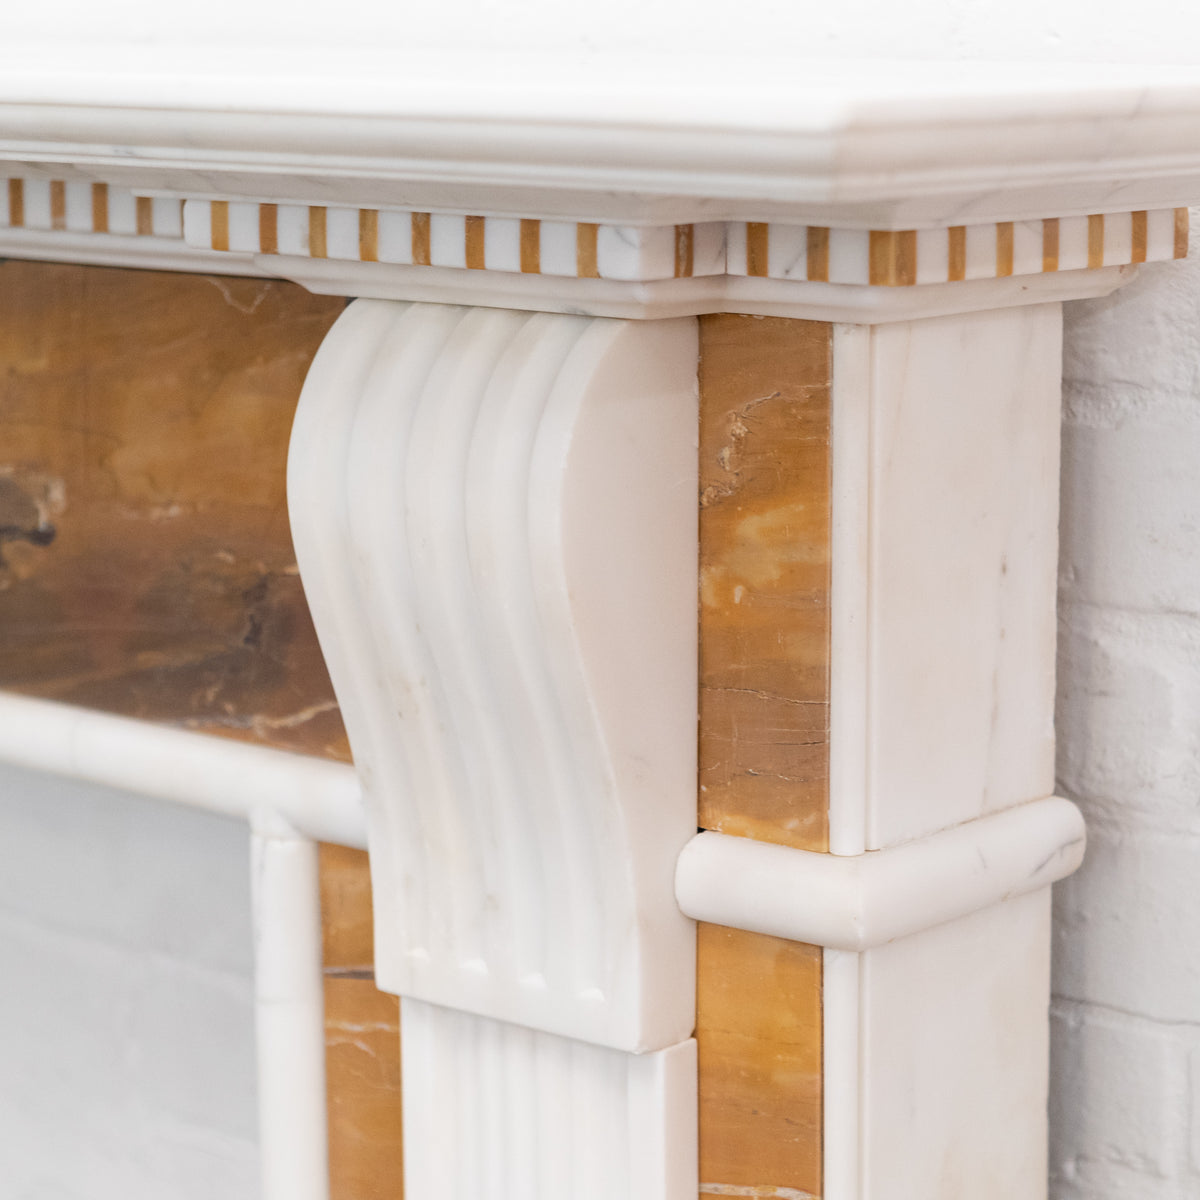 Impressive Georgian Style Statuary &amp; Sienna Marble Chimneypiece | The Architectural Forum